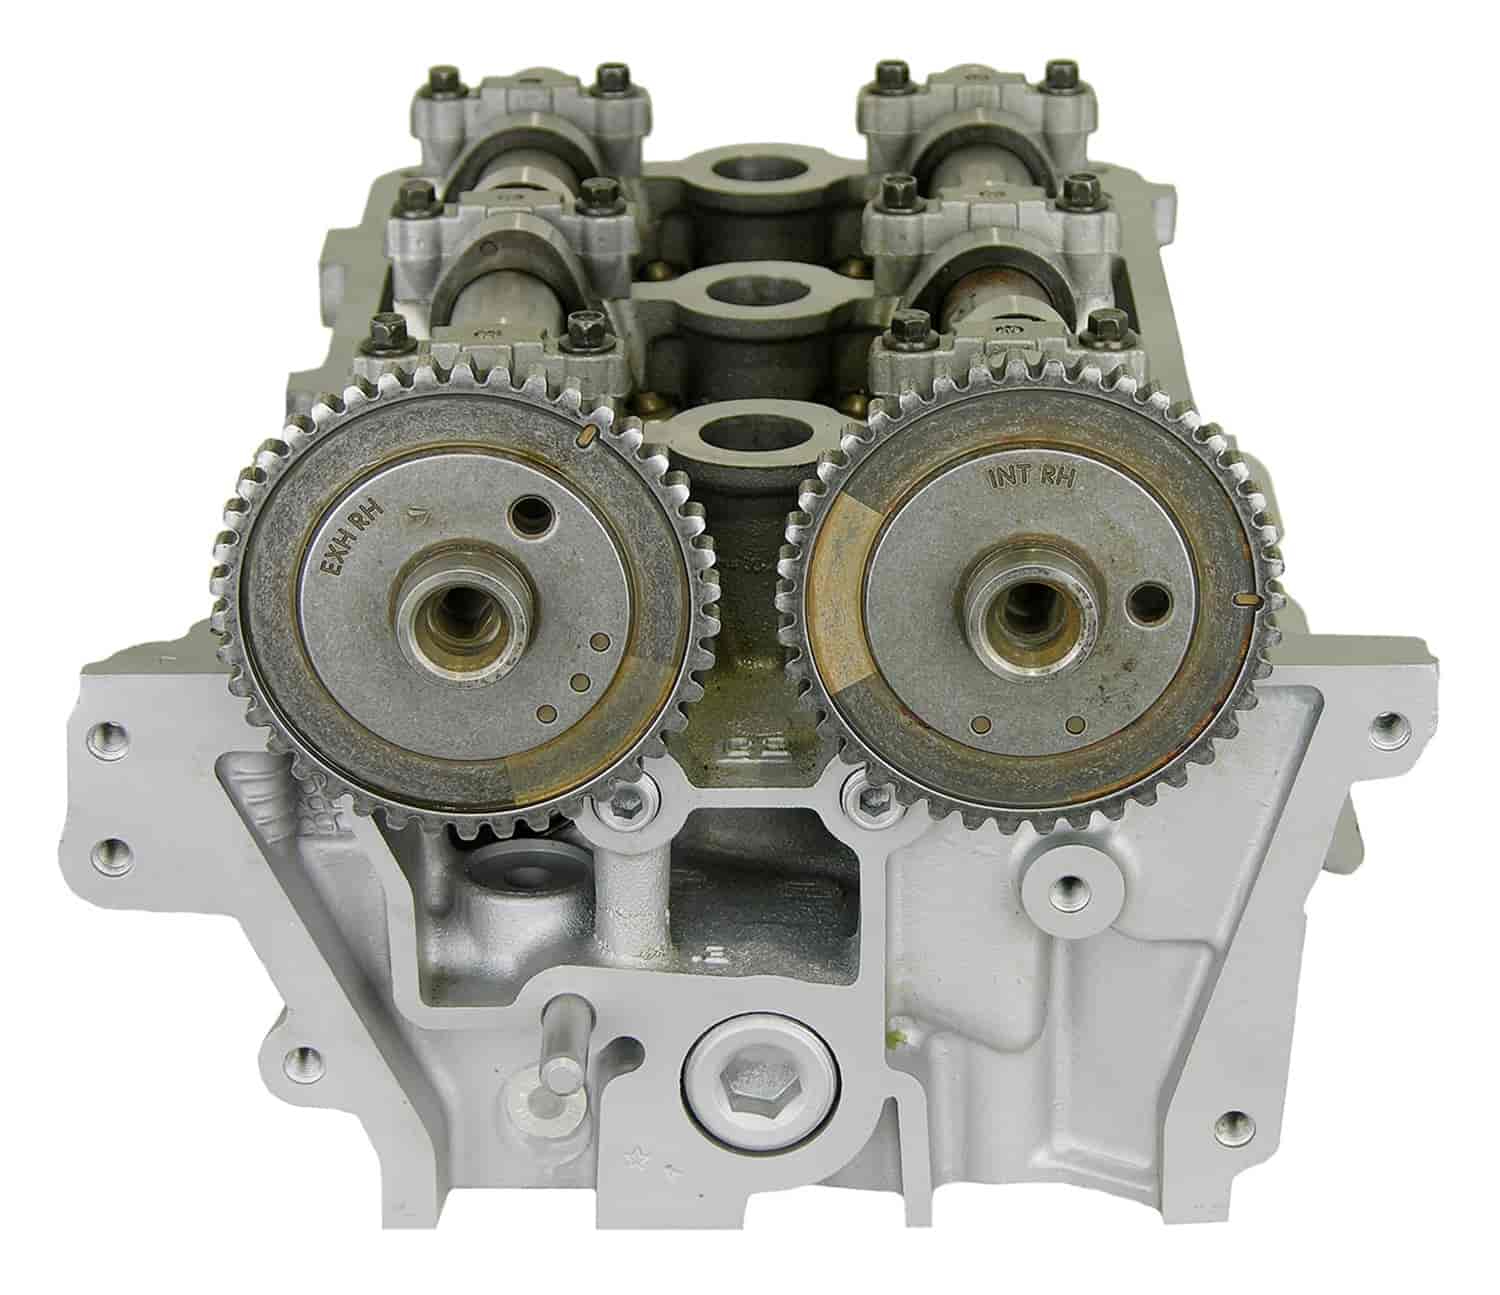 Remanufactured Cylinder Head for 2000-2008 Ford/Mazda/Mercury with 3.0L V6